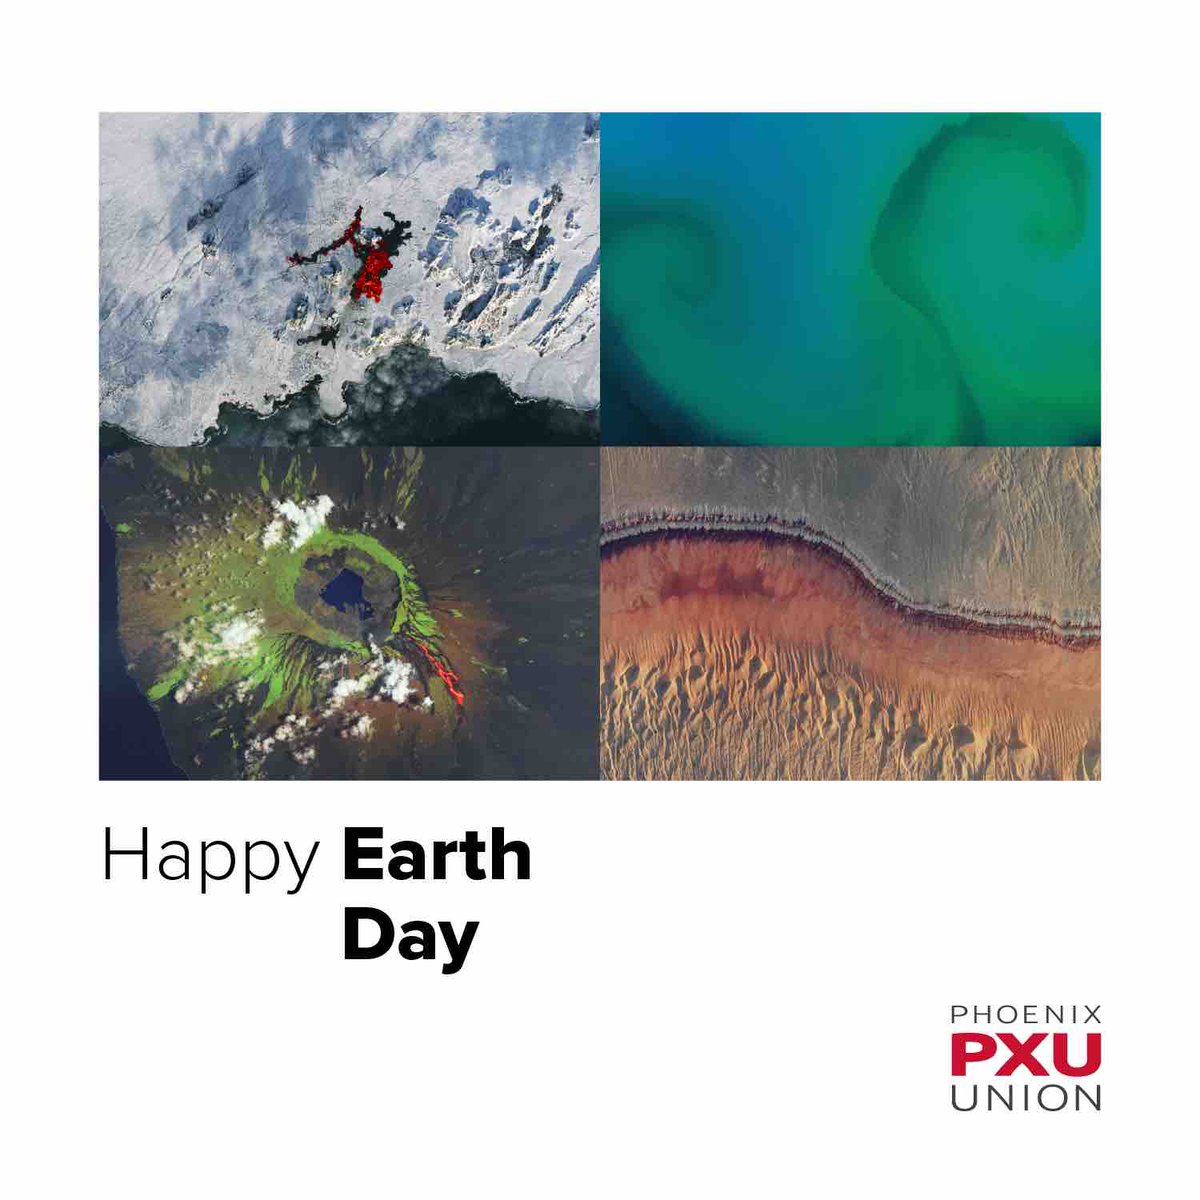 Happy Earth Day, PXU Family! 🌍 Today and every day, we strive to do our part to take care of our planet. We encourage you to connect with your campus sustainability officers to think of ways to make a difference at your school!